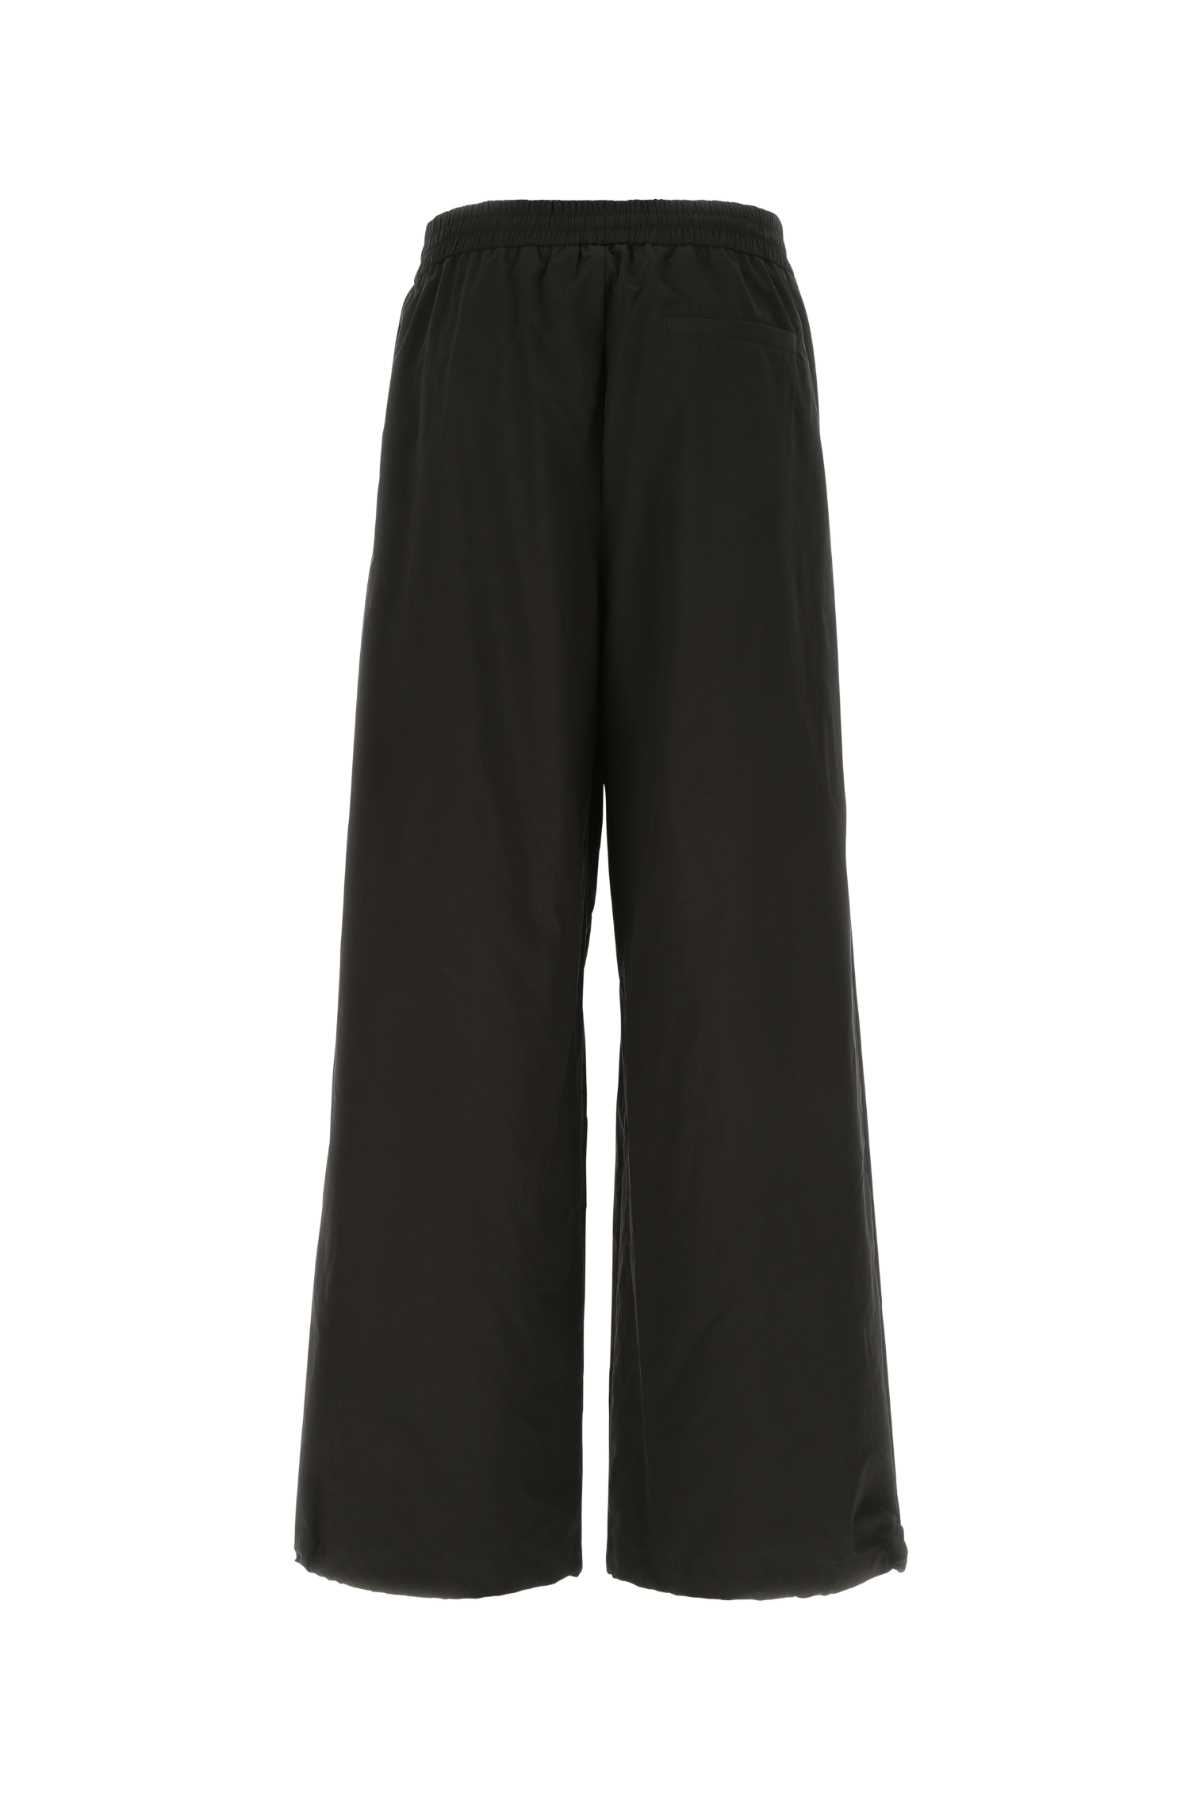 Off-white Black Polyester Blend Pant In 1010